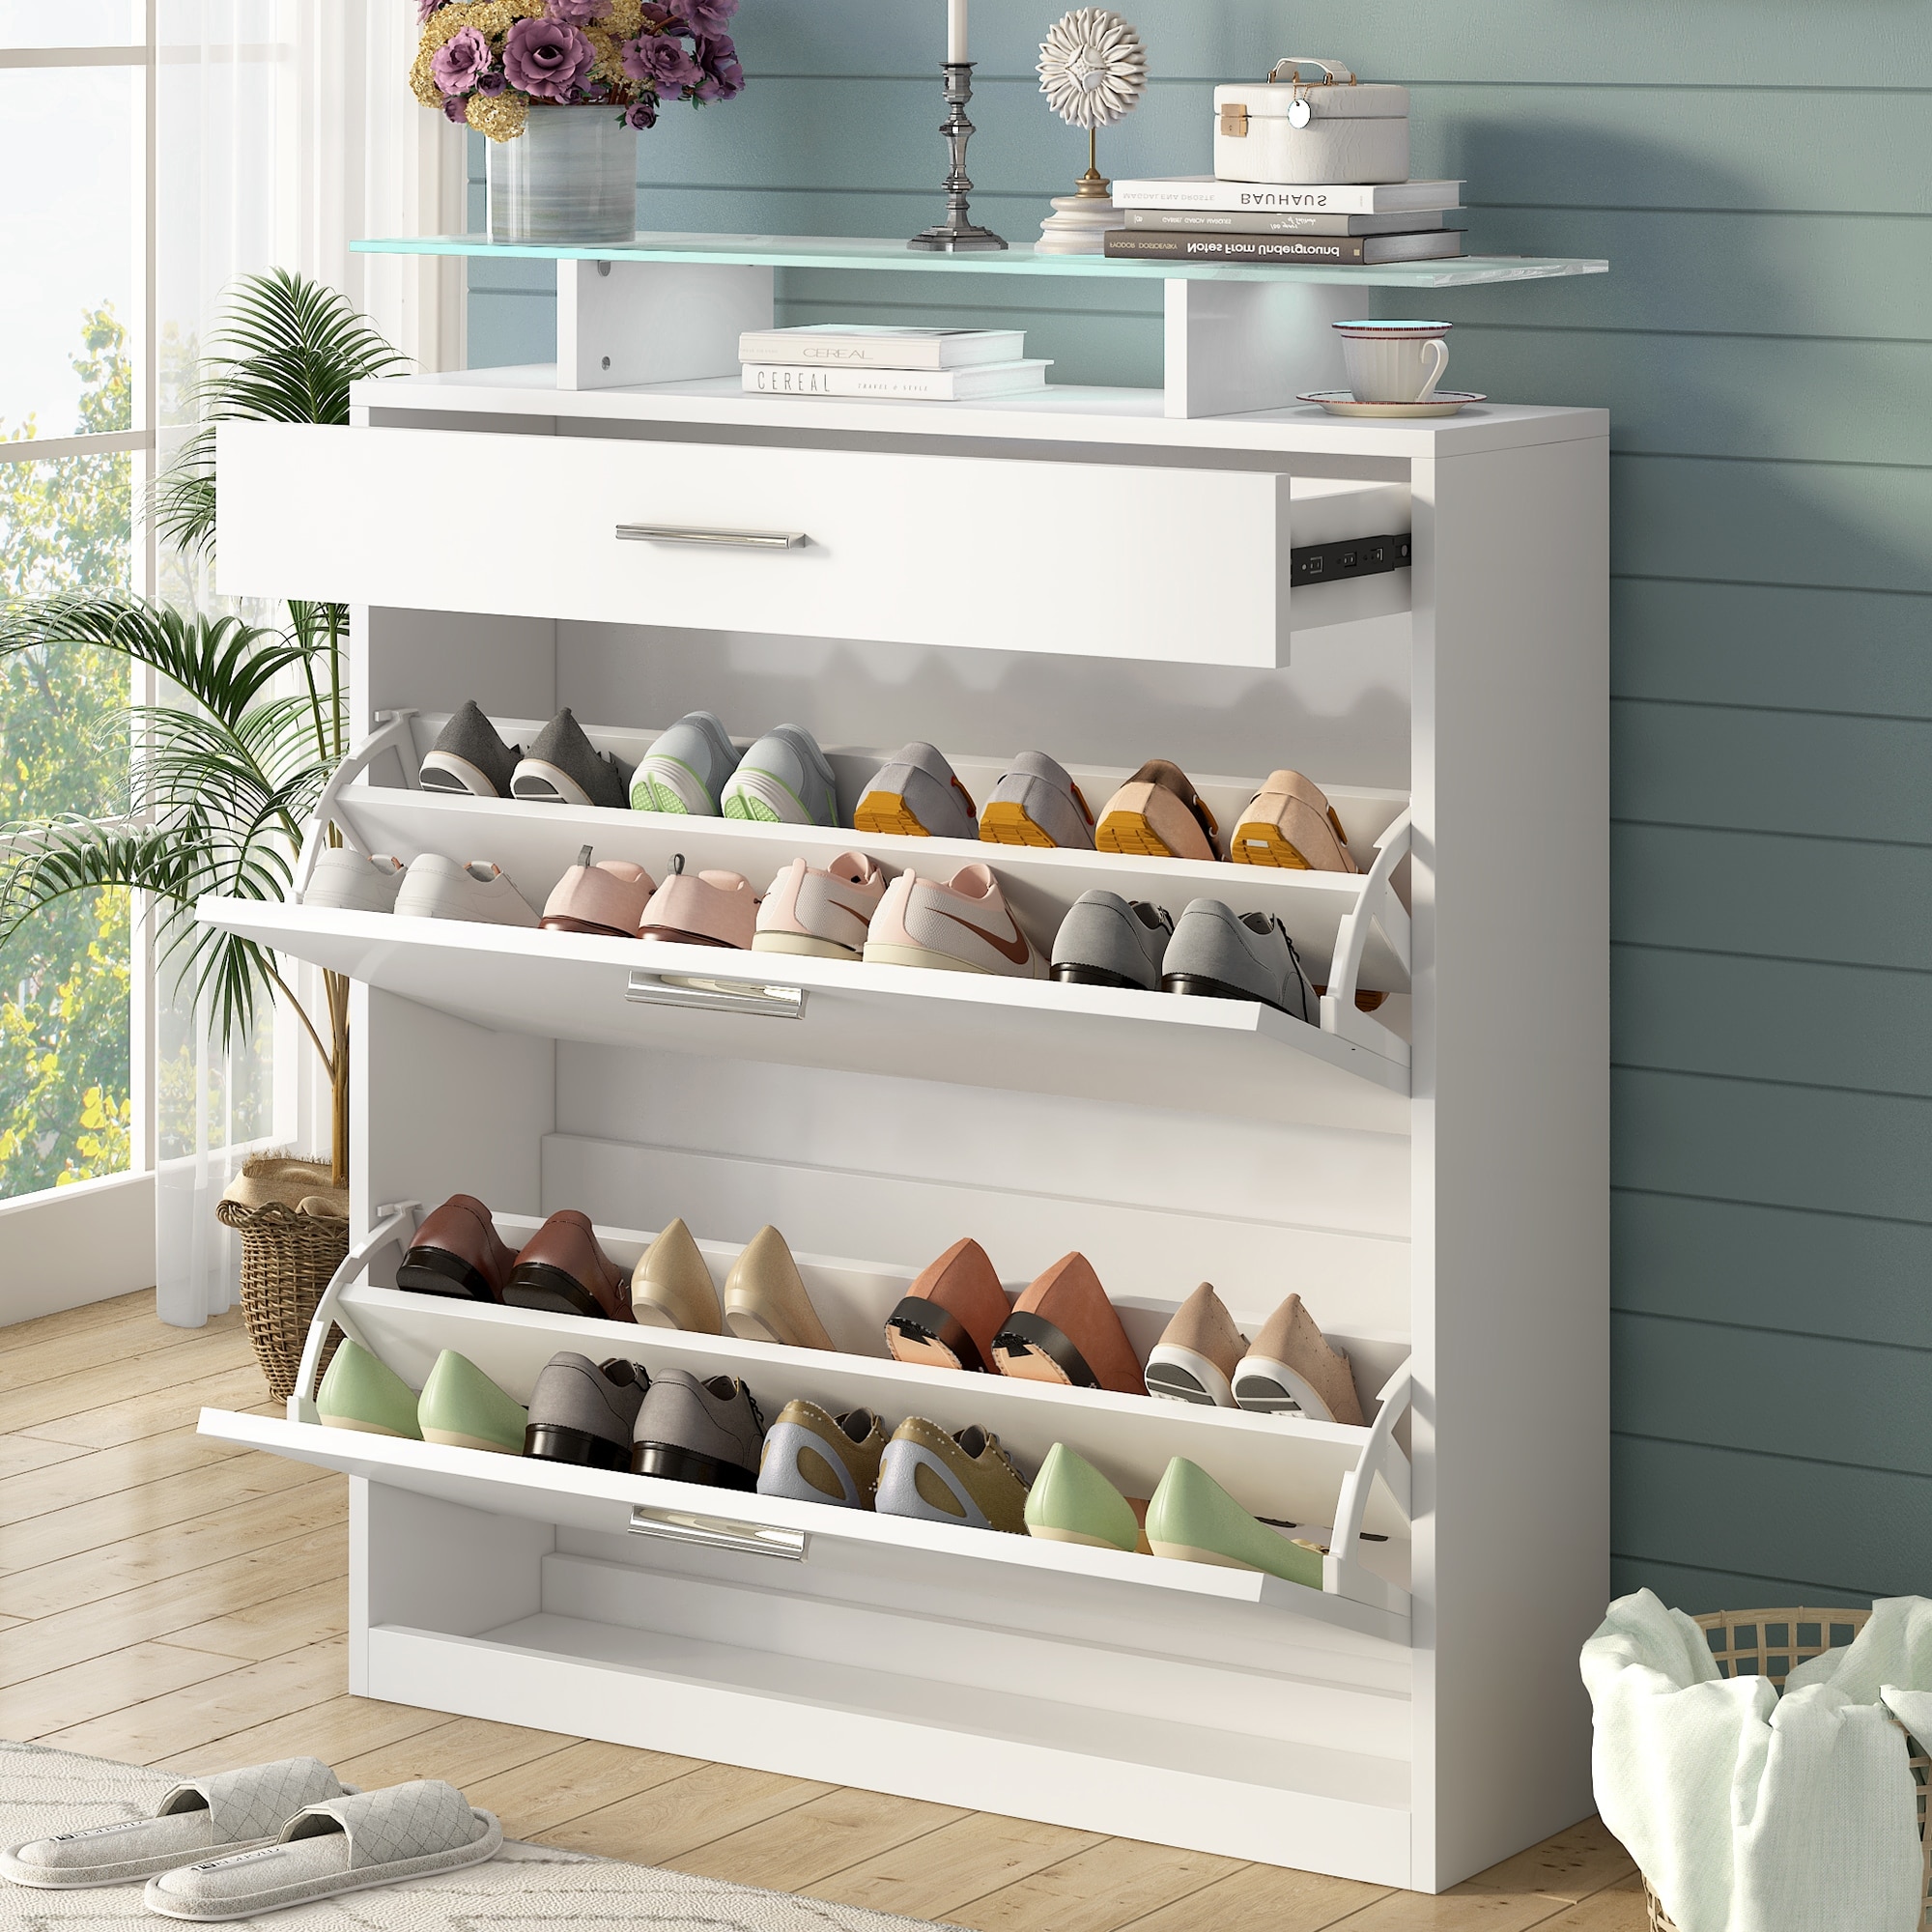 https://ak1.ostkcdn.com/images/products/is/images/direct/7ed8a0ba4df641c474002a7a9e04d44954de2b5d/Free-Standing-Shoe-Rack-with-LED-Light-%26-2-Flip-Drawers%2C-Tempered-Glass-Top-Storage-Cabinet-Slim-Entryway-Organizer-for-Hallway.jpg